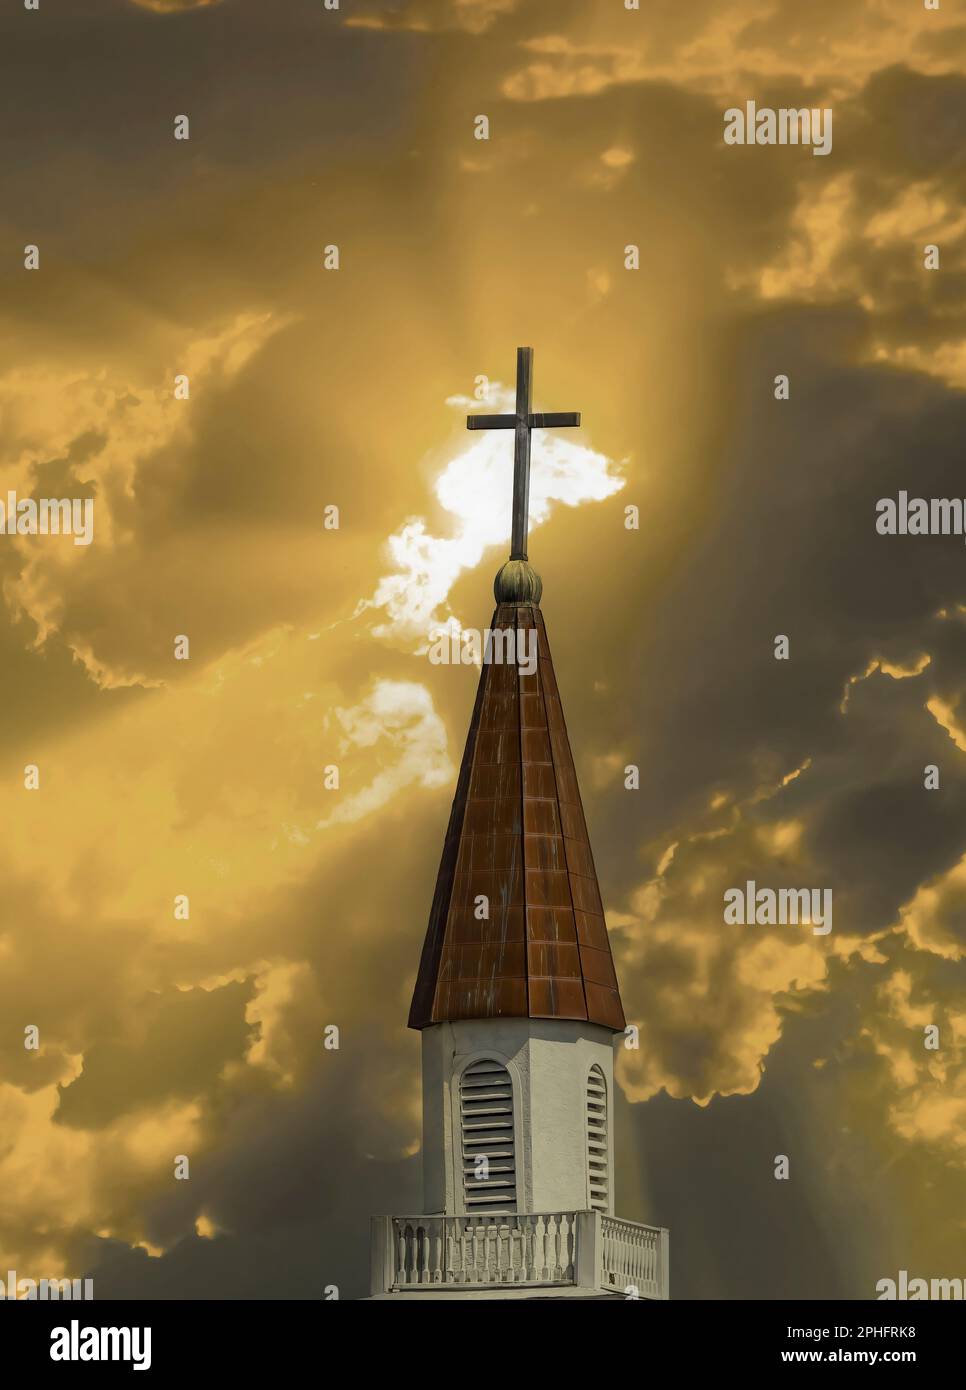 Church steeple with cross on top aganist a light streaked dramatic sky Stock Photo